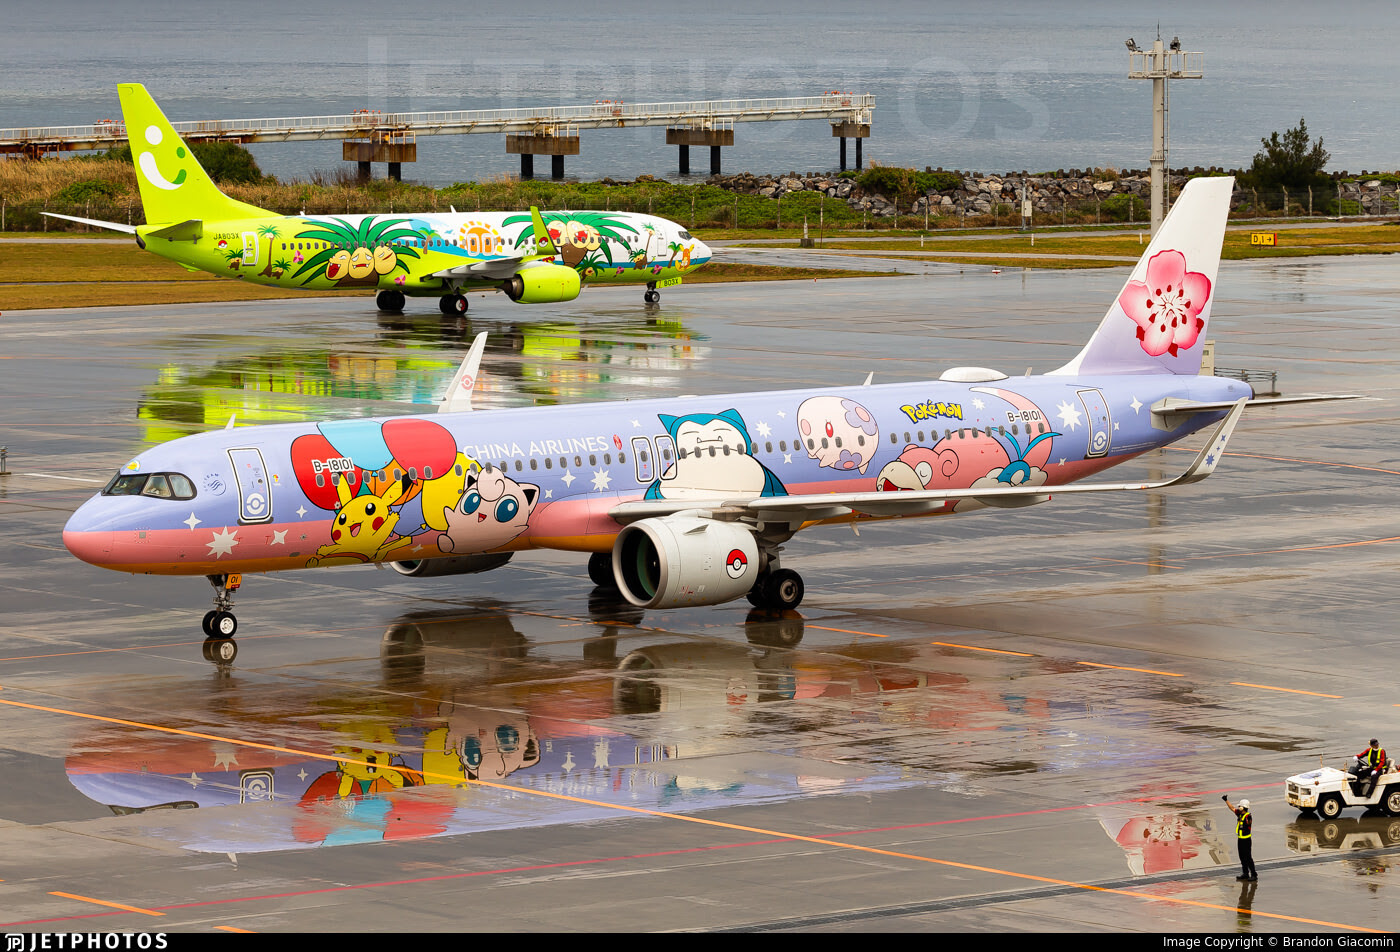 China Airlines and Solaseed Pokémon jets